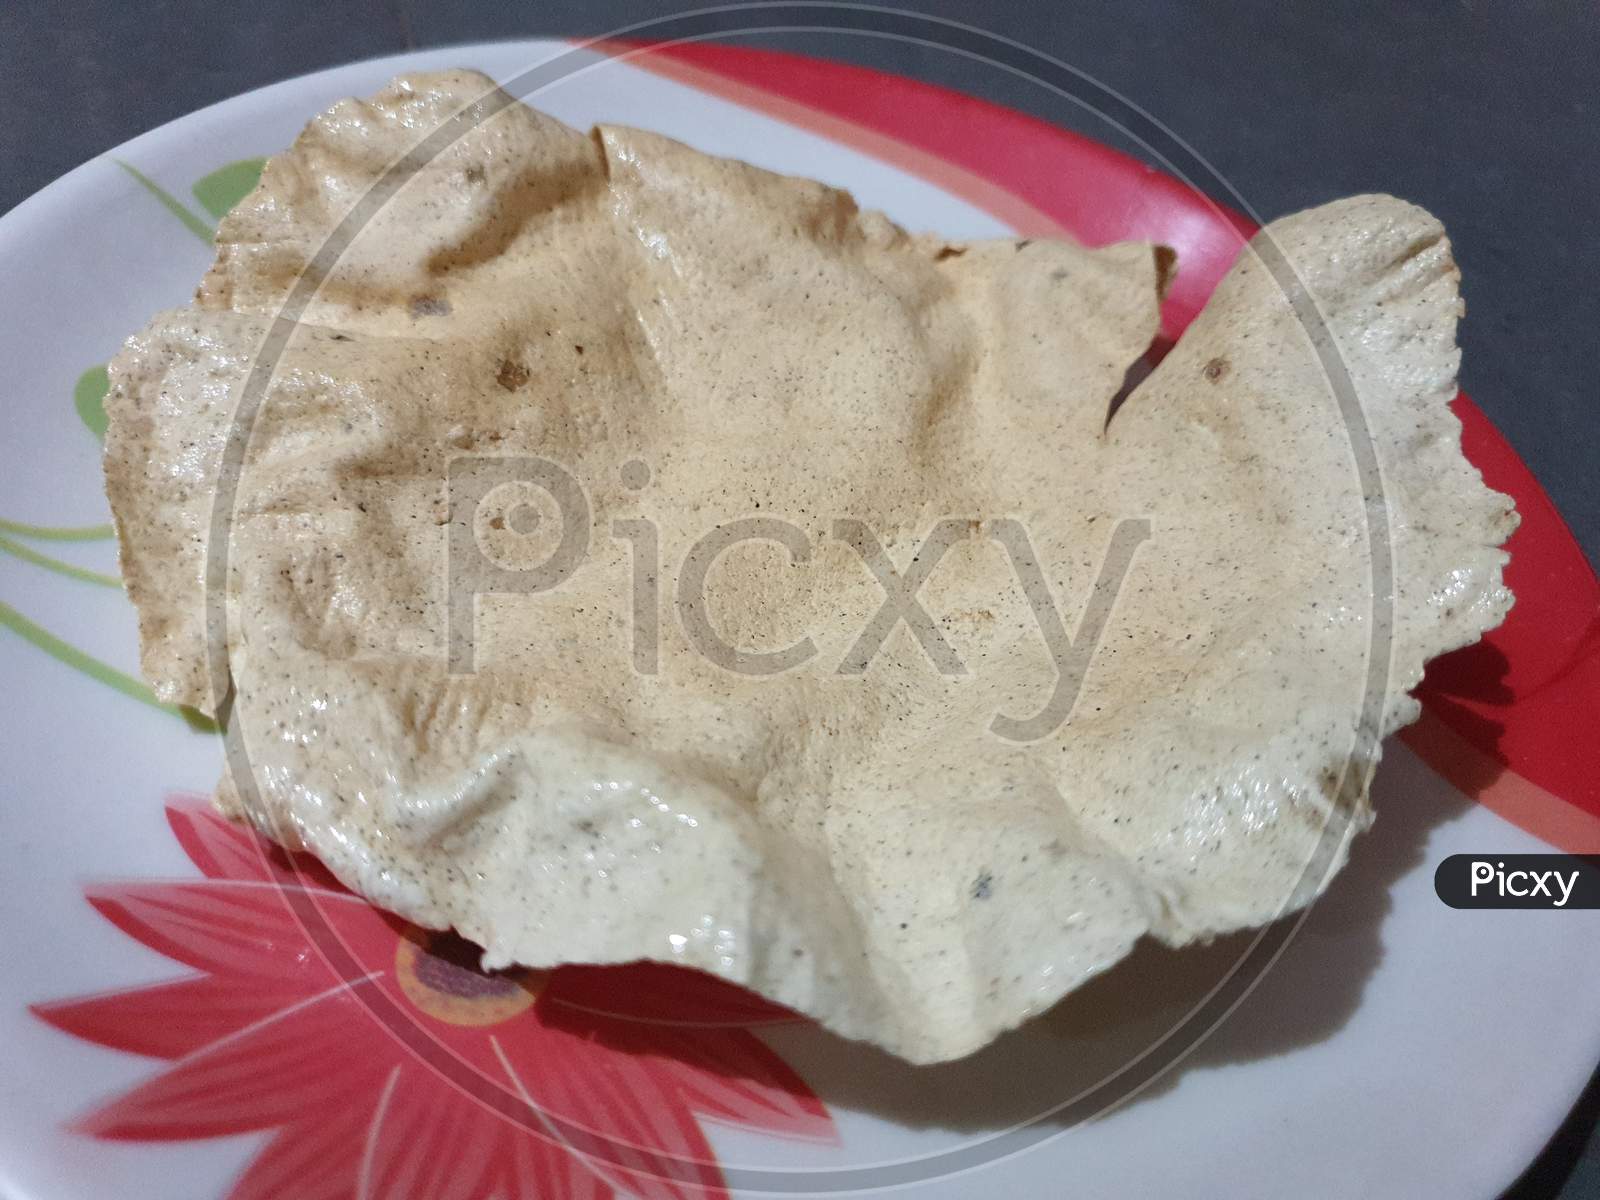 This is a delicious papad